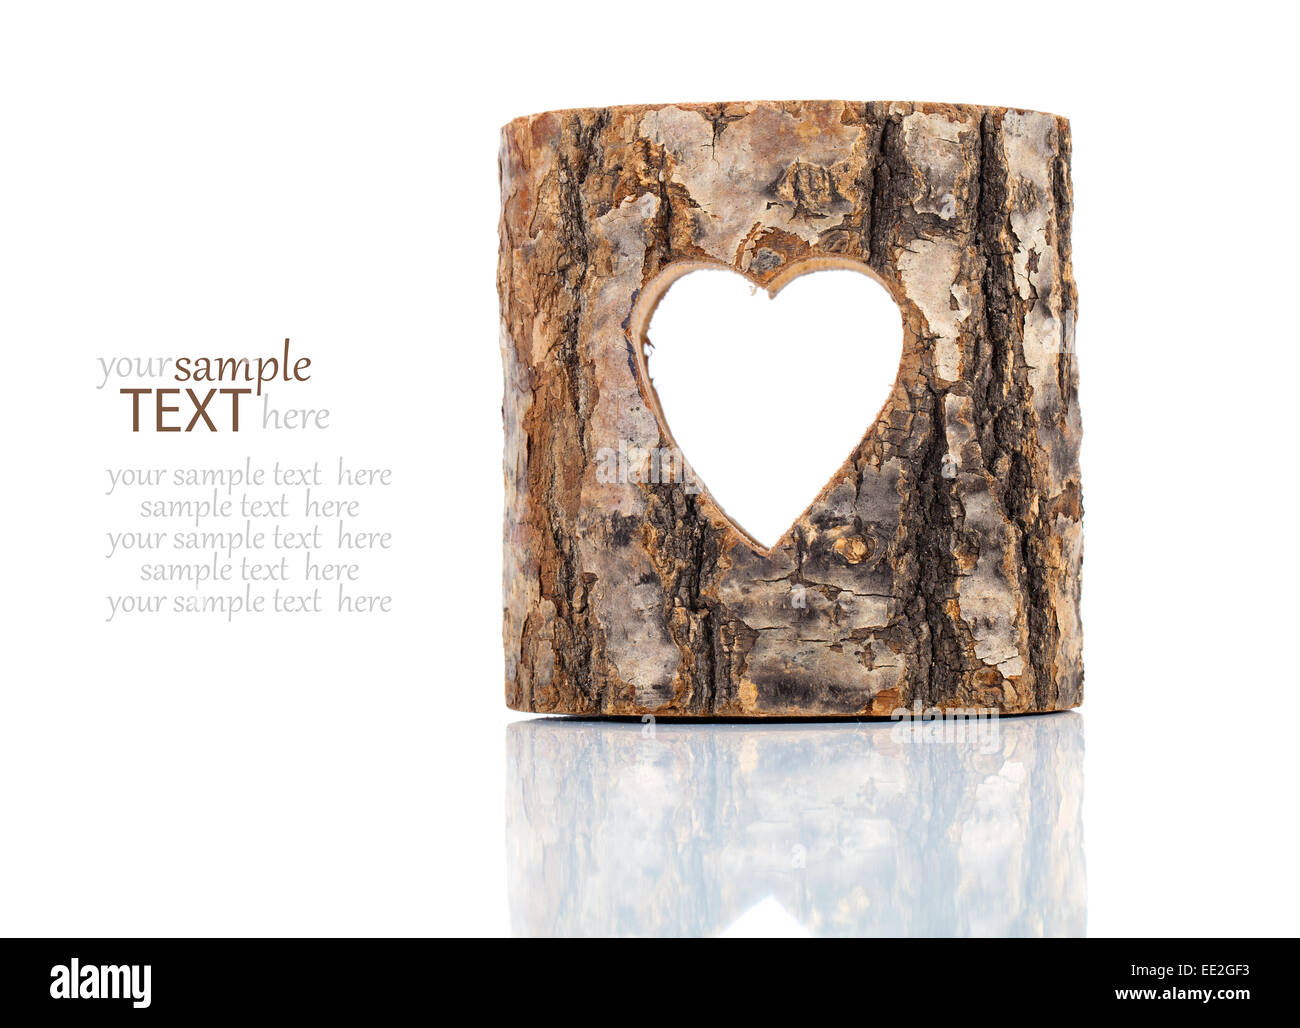 heart cut in hollow tree trunk. on white background Stock Photo